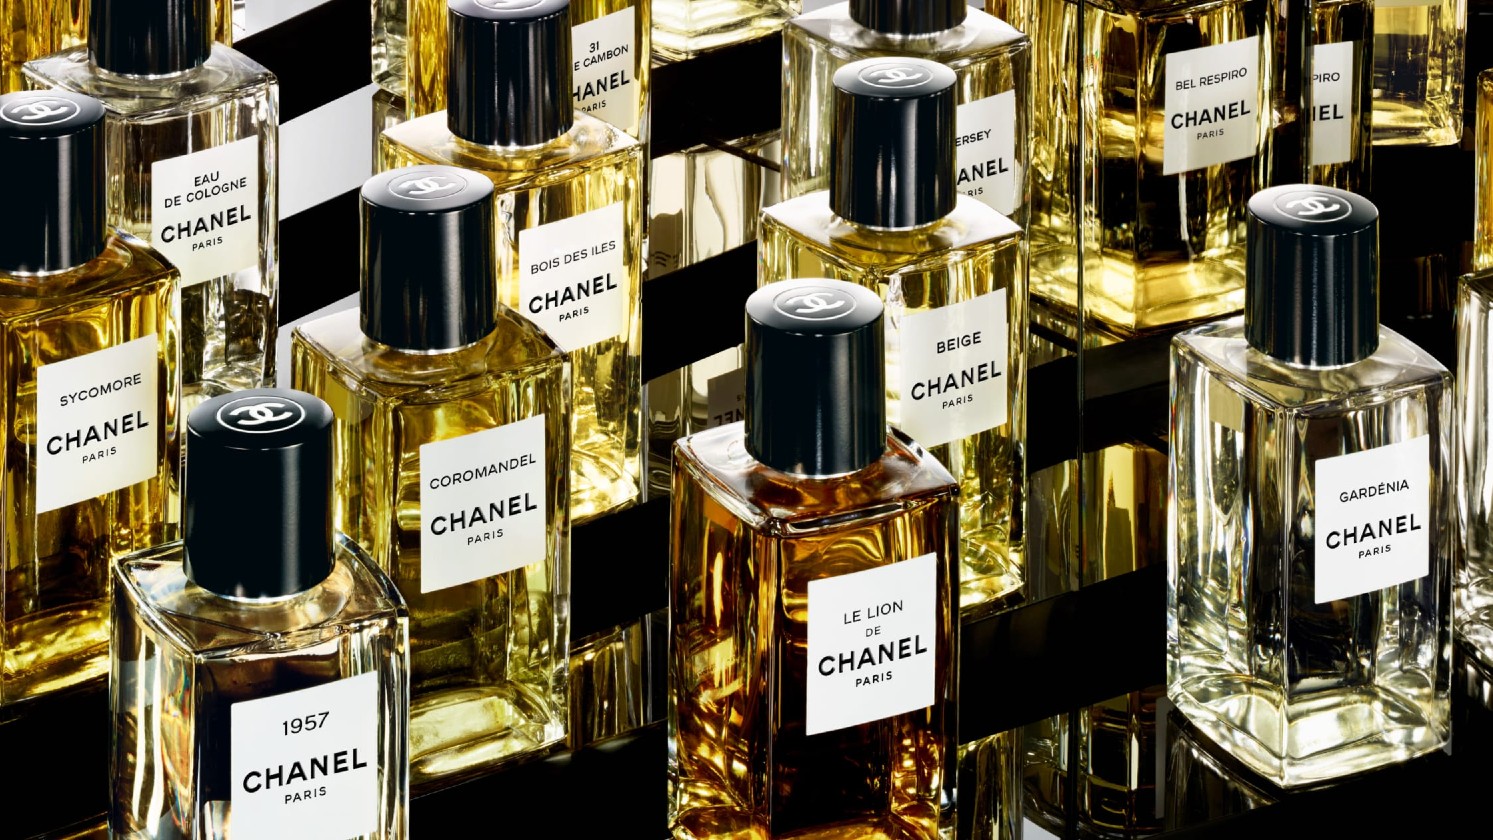 top rated chanel perfume